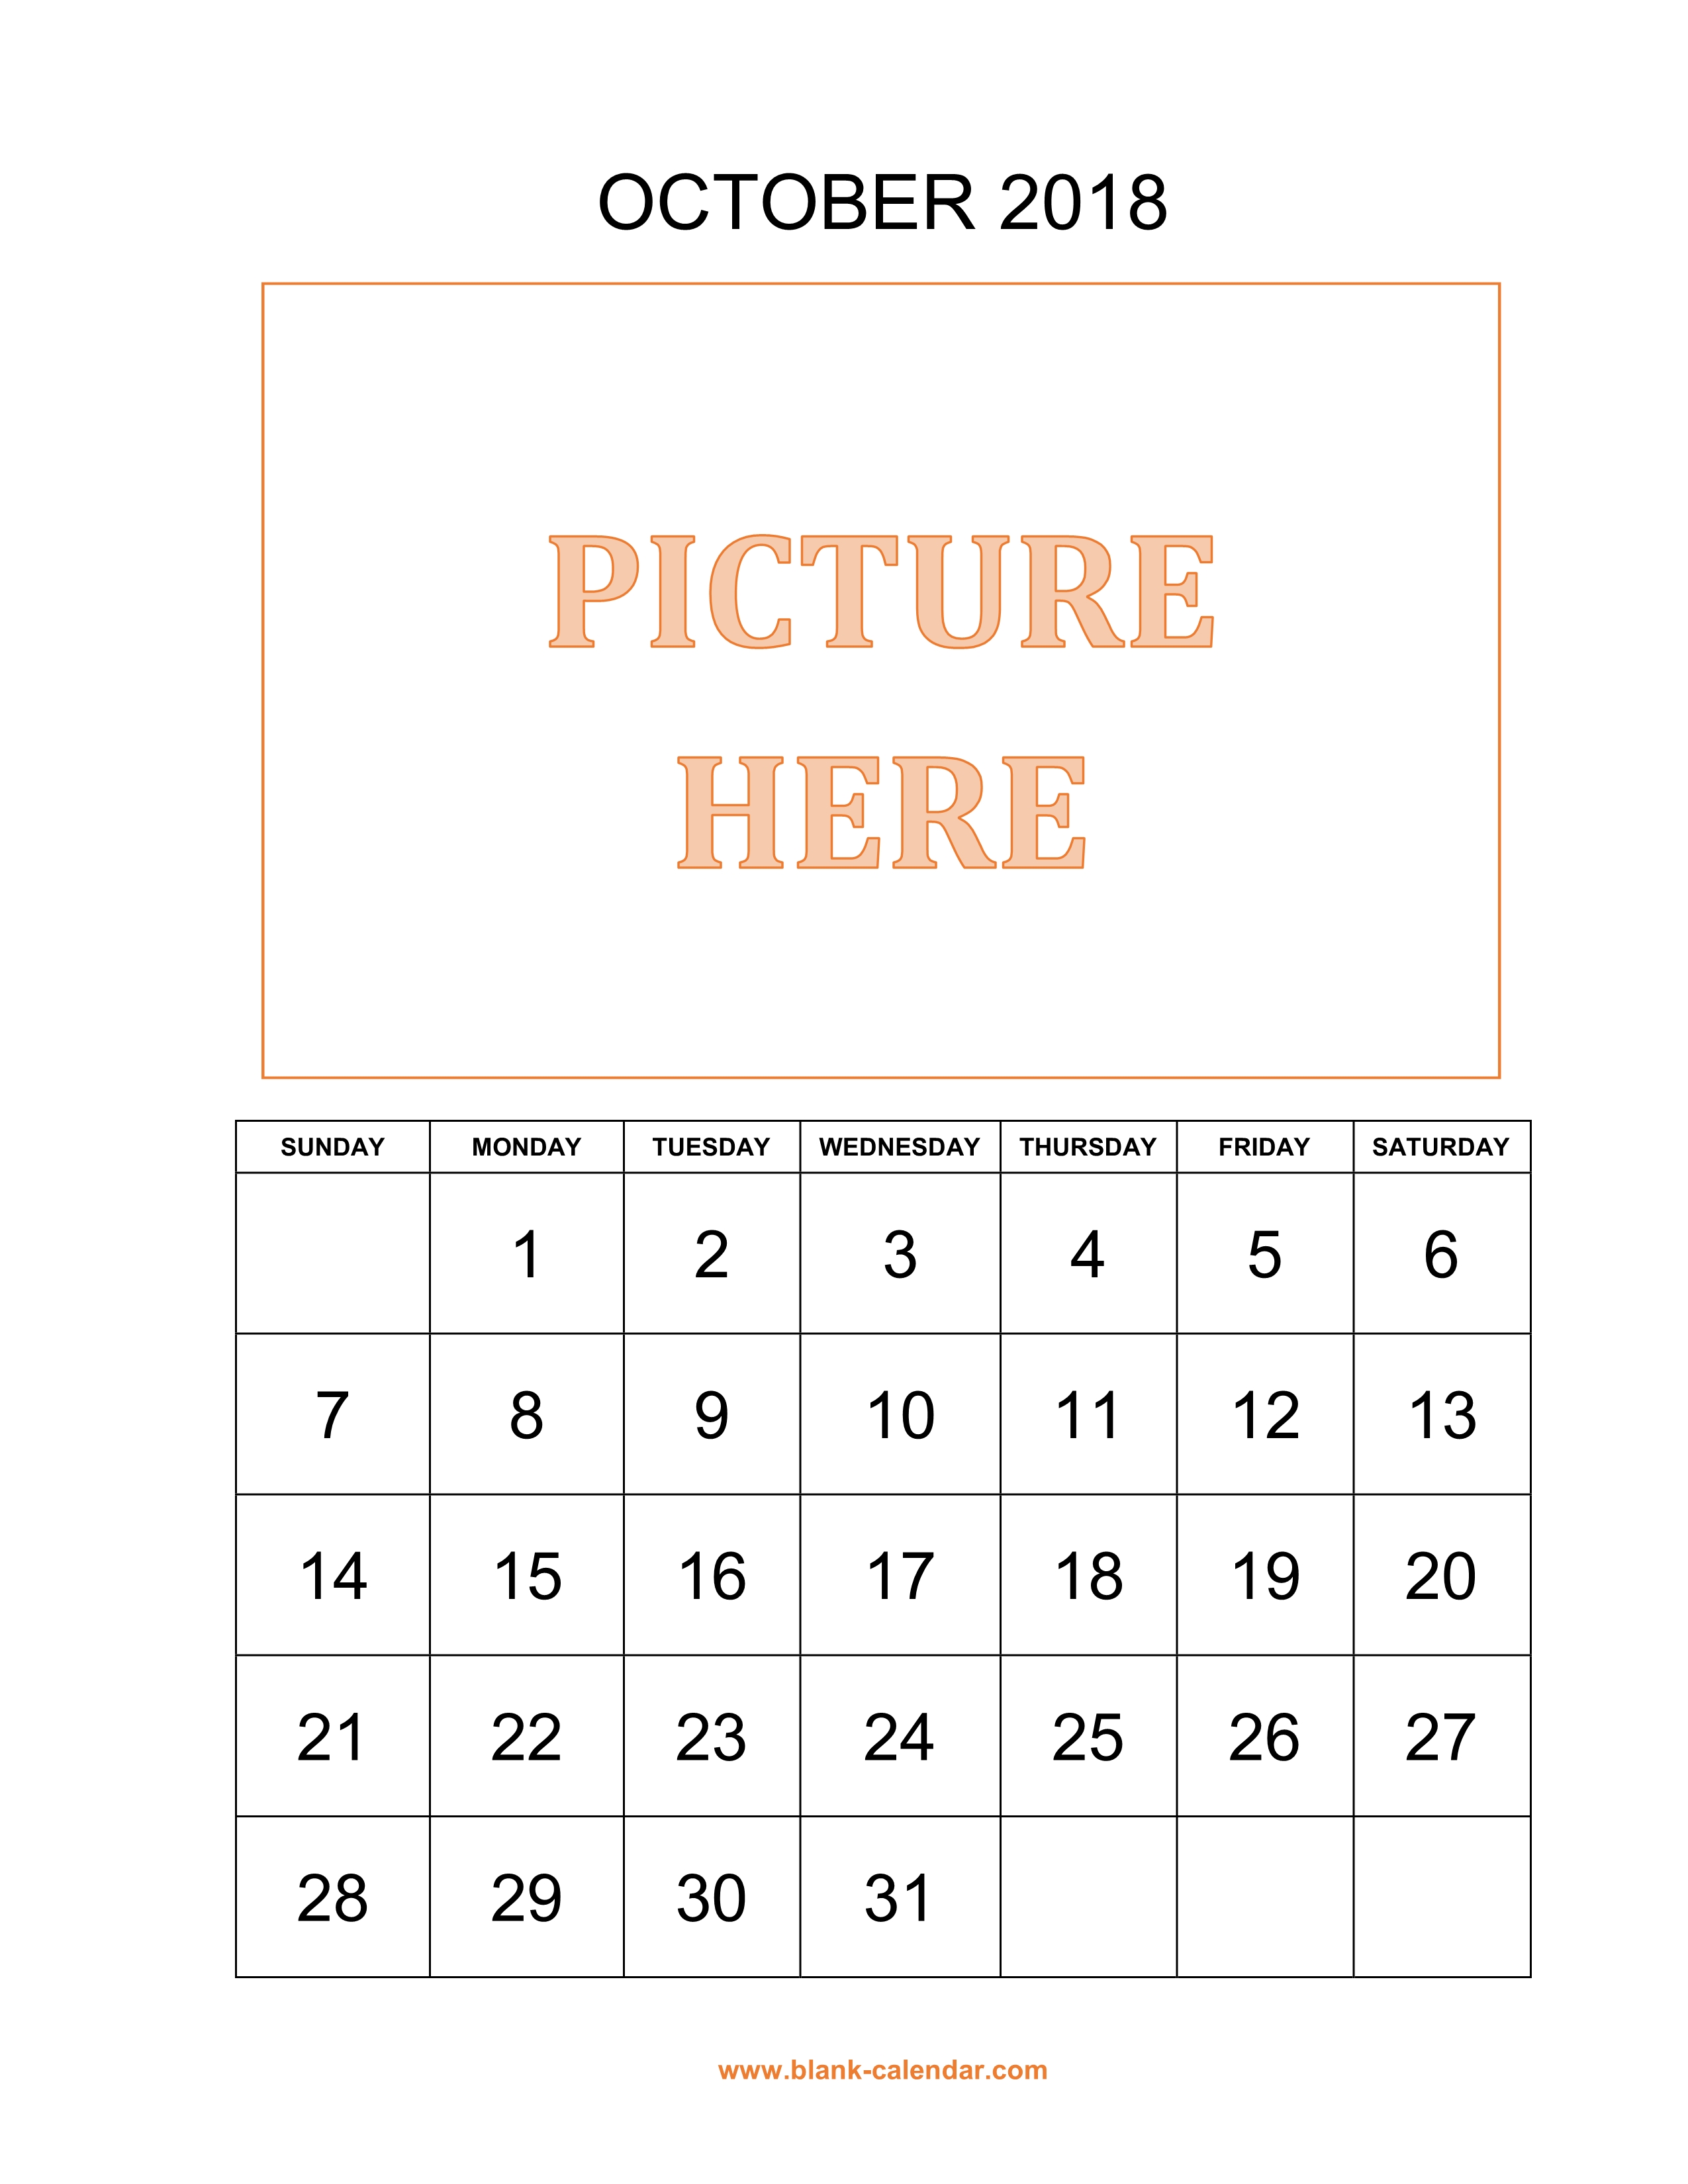 Free Download Printable October 2018 Calendar Pictures Can Be Placed